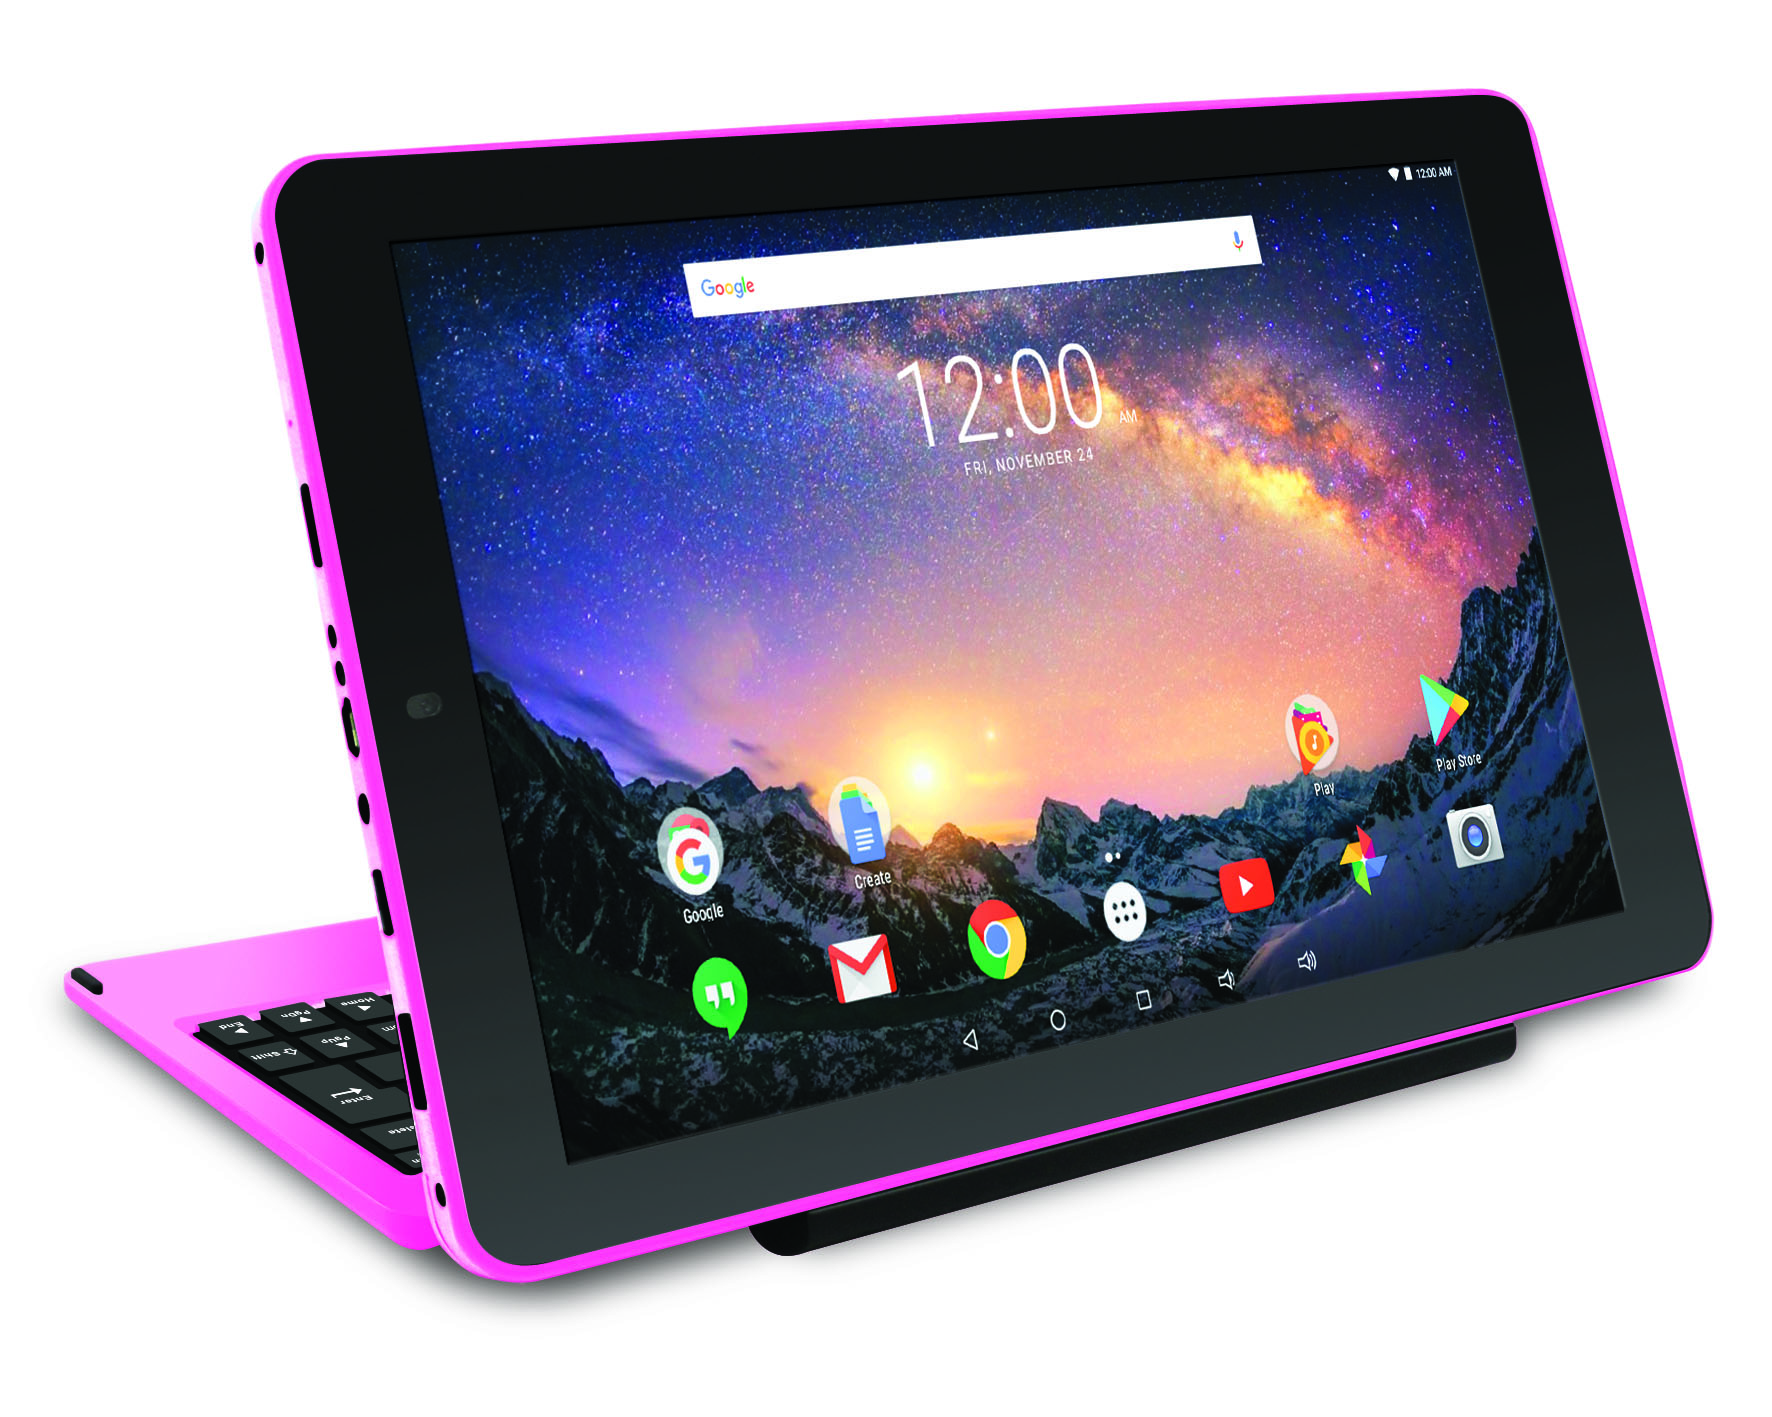 RCA Galileo Pro 11.5" 32GB 2-in-1 Tablet with Keyboard Case Android OS, Pink (Google Classroom Ready) - image 1 of 4